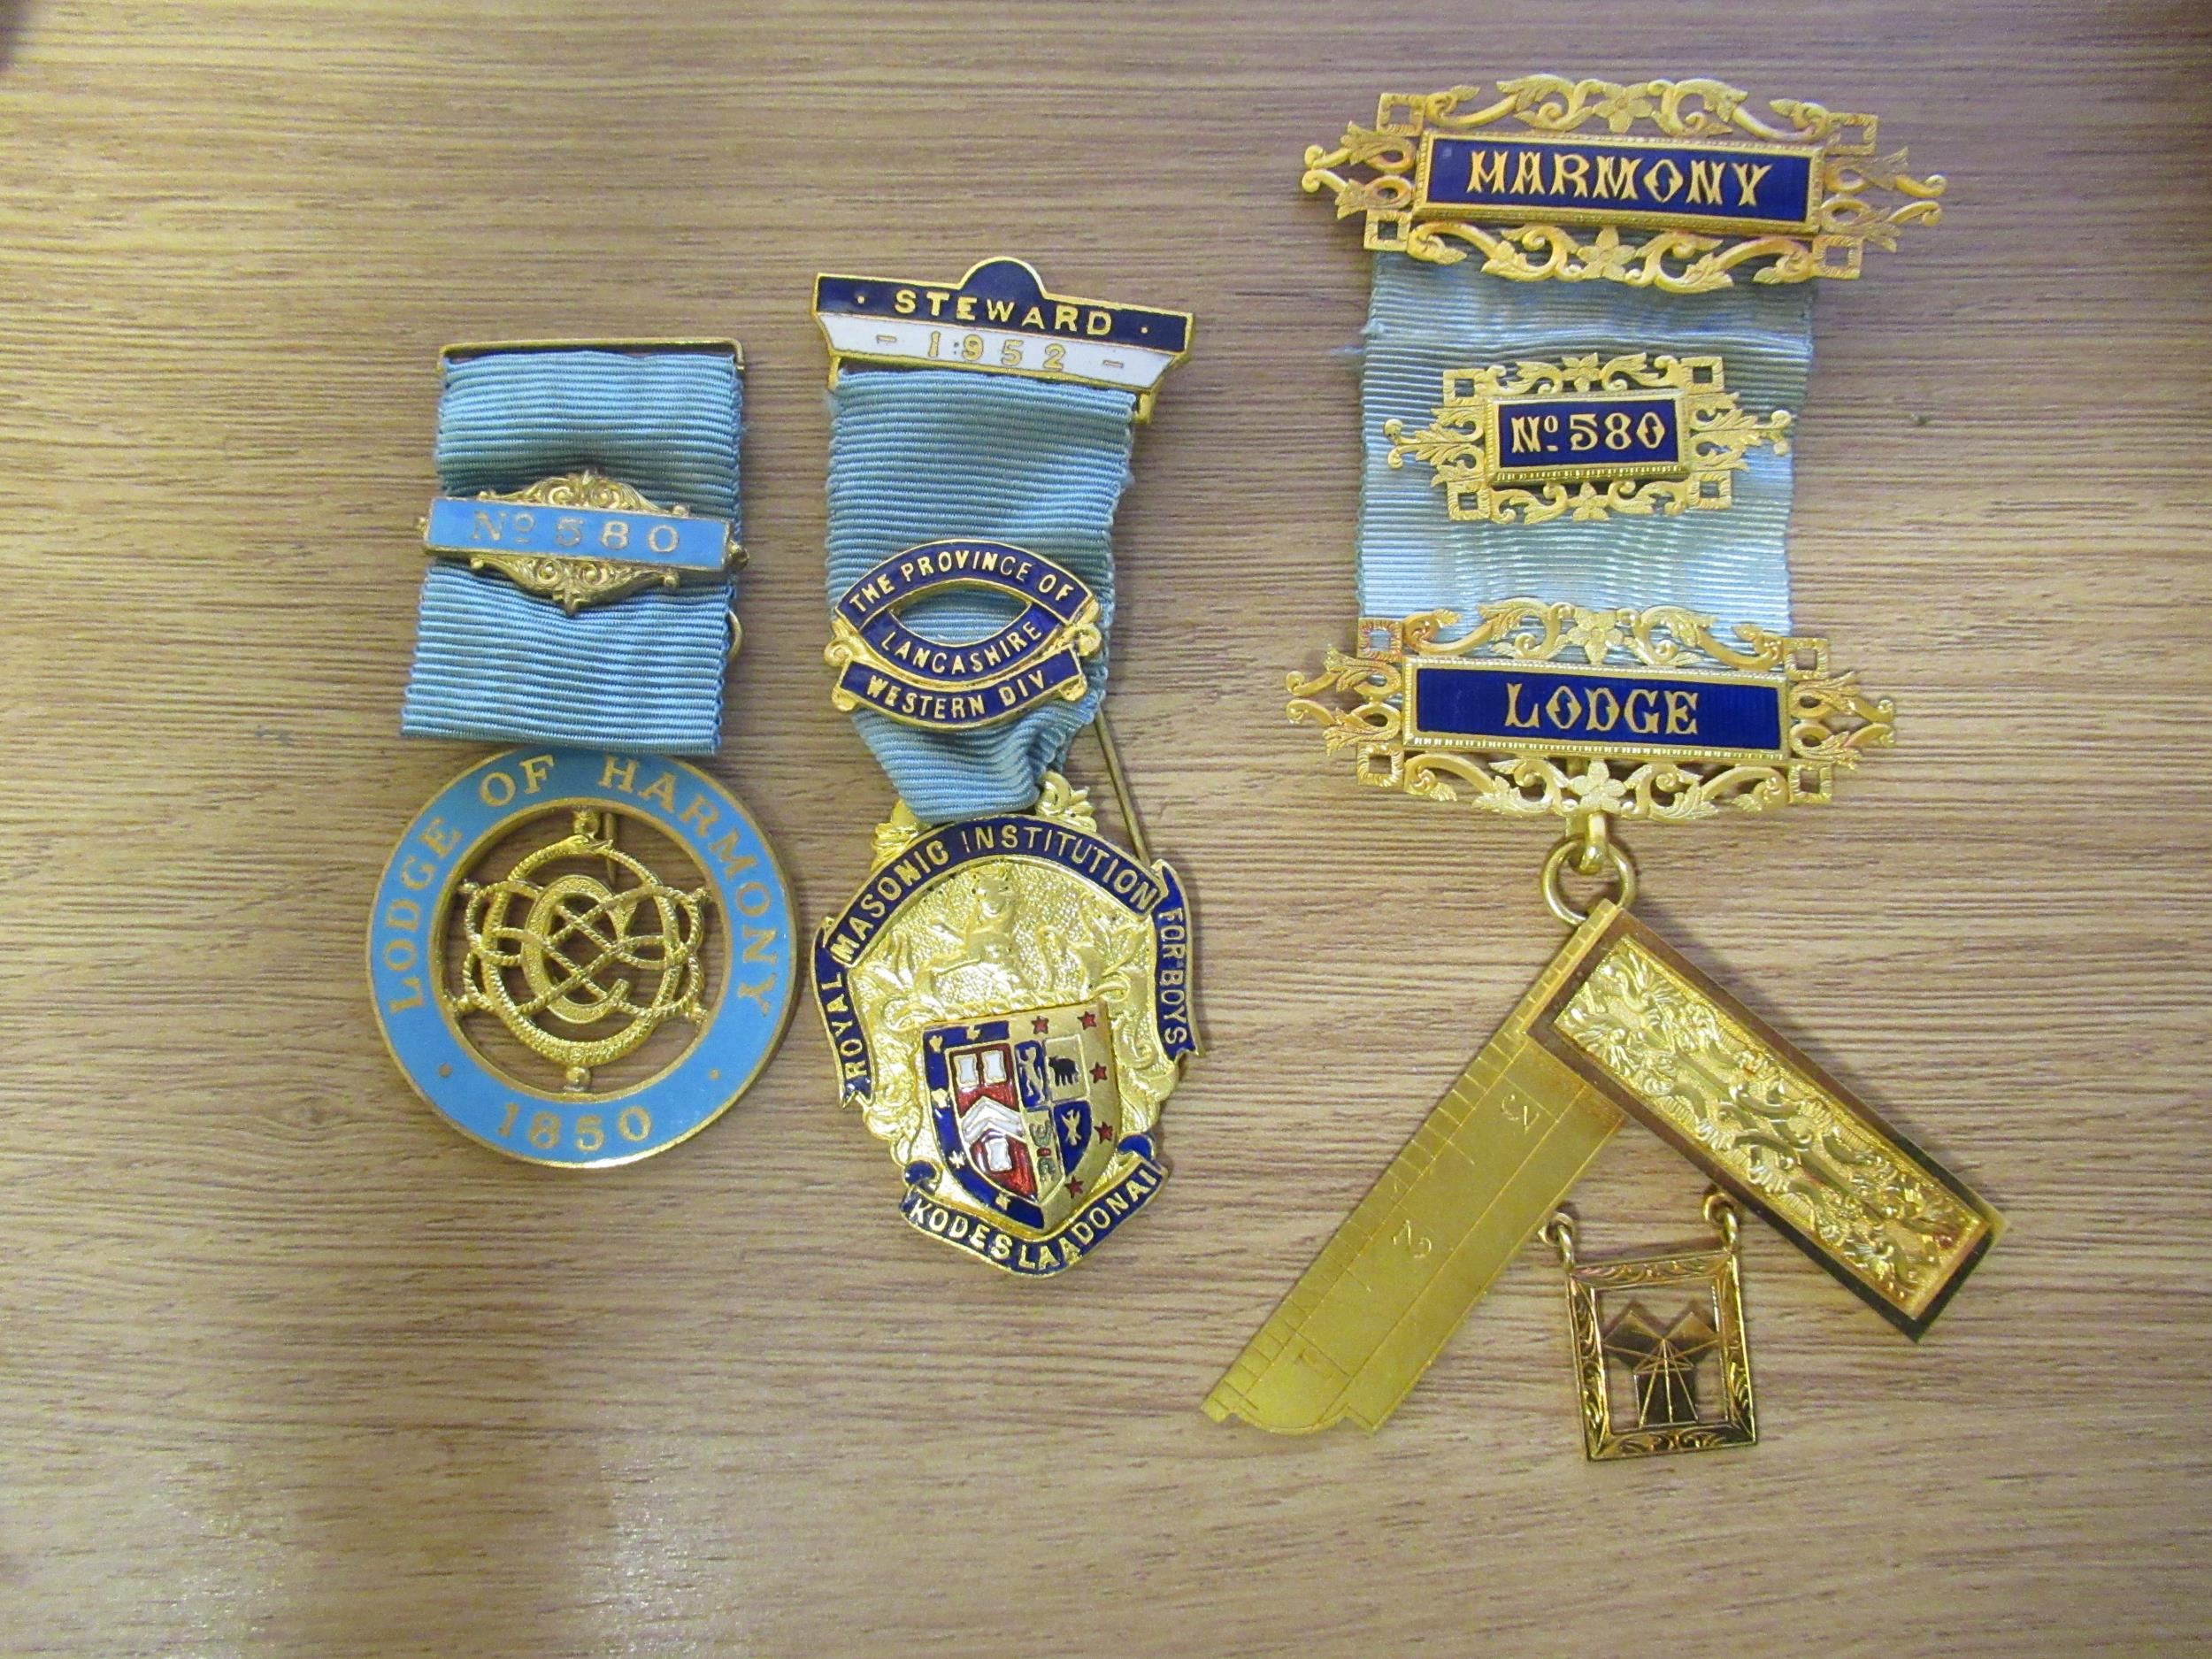 Collection of Craft & Chapter Masonic Regalia from the Harmony Lodge of Ormskirk, West Lancashire,